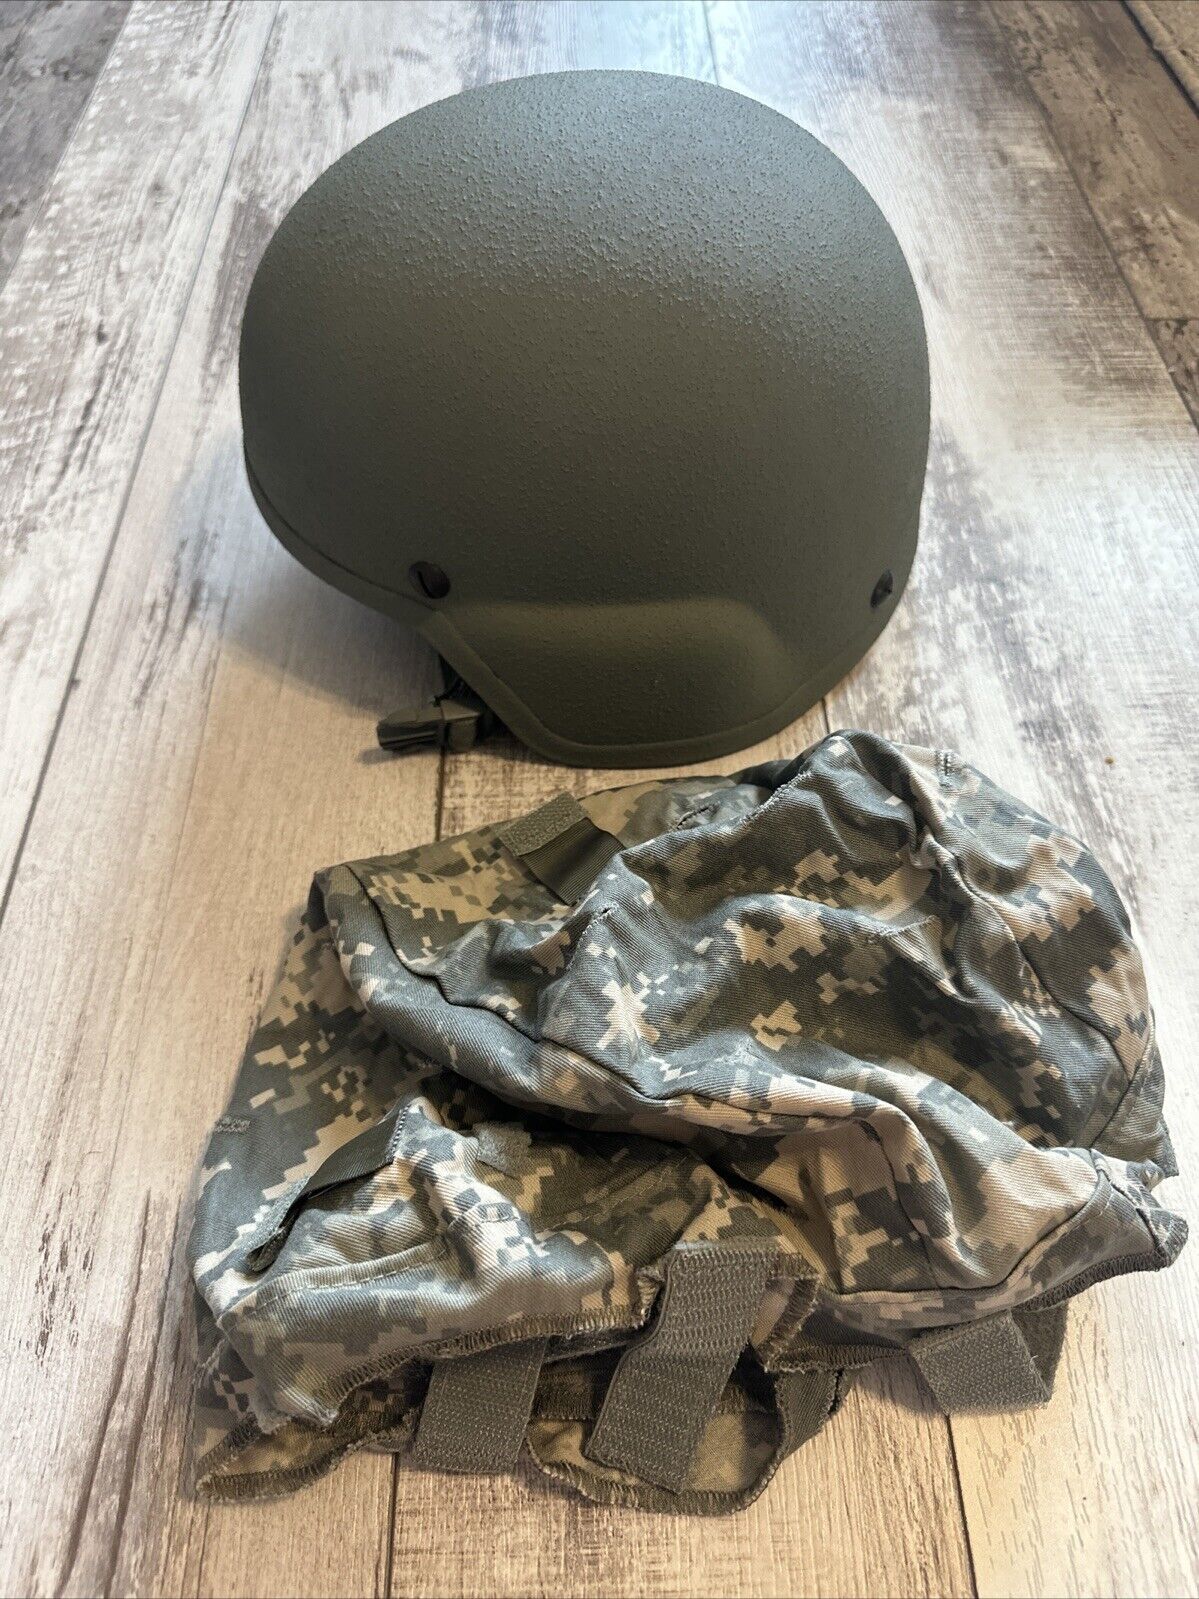 Advance Combat Helmet ACH Military Tactical Headgear by BAE Systems Size Large